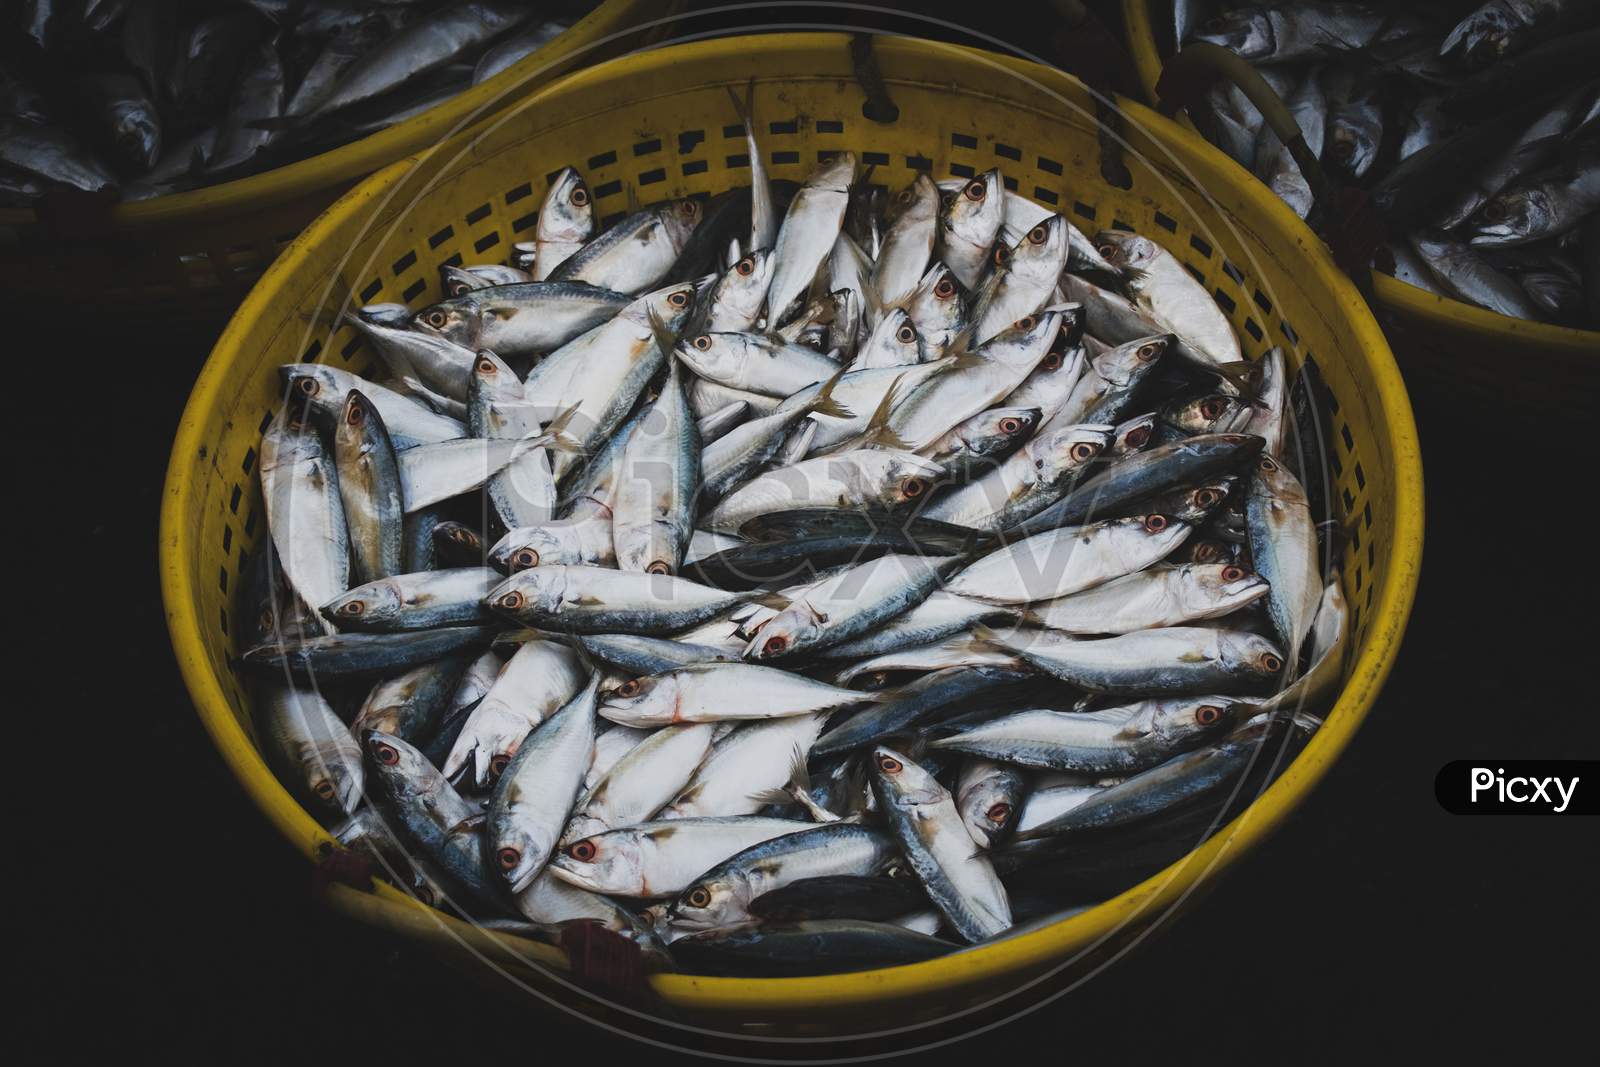 Collection Of Indian Mackerel In A Fish Container For Sale In The Market.